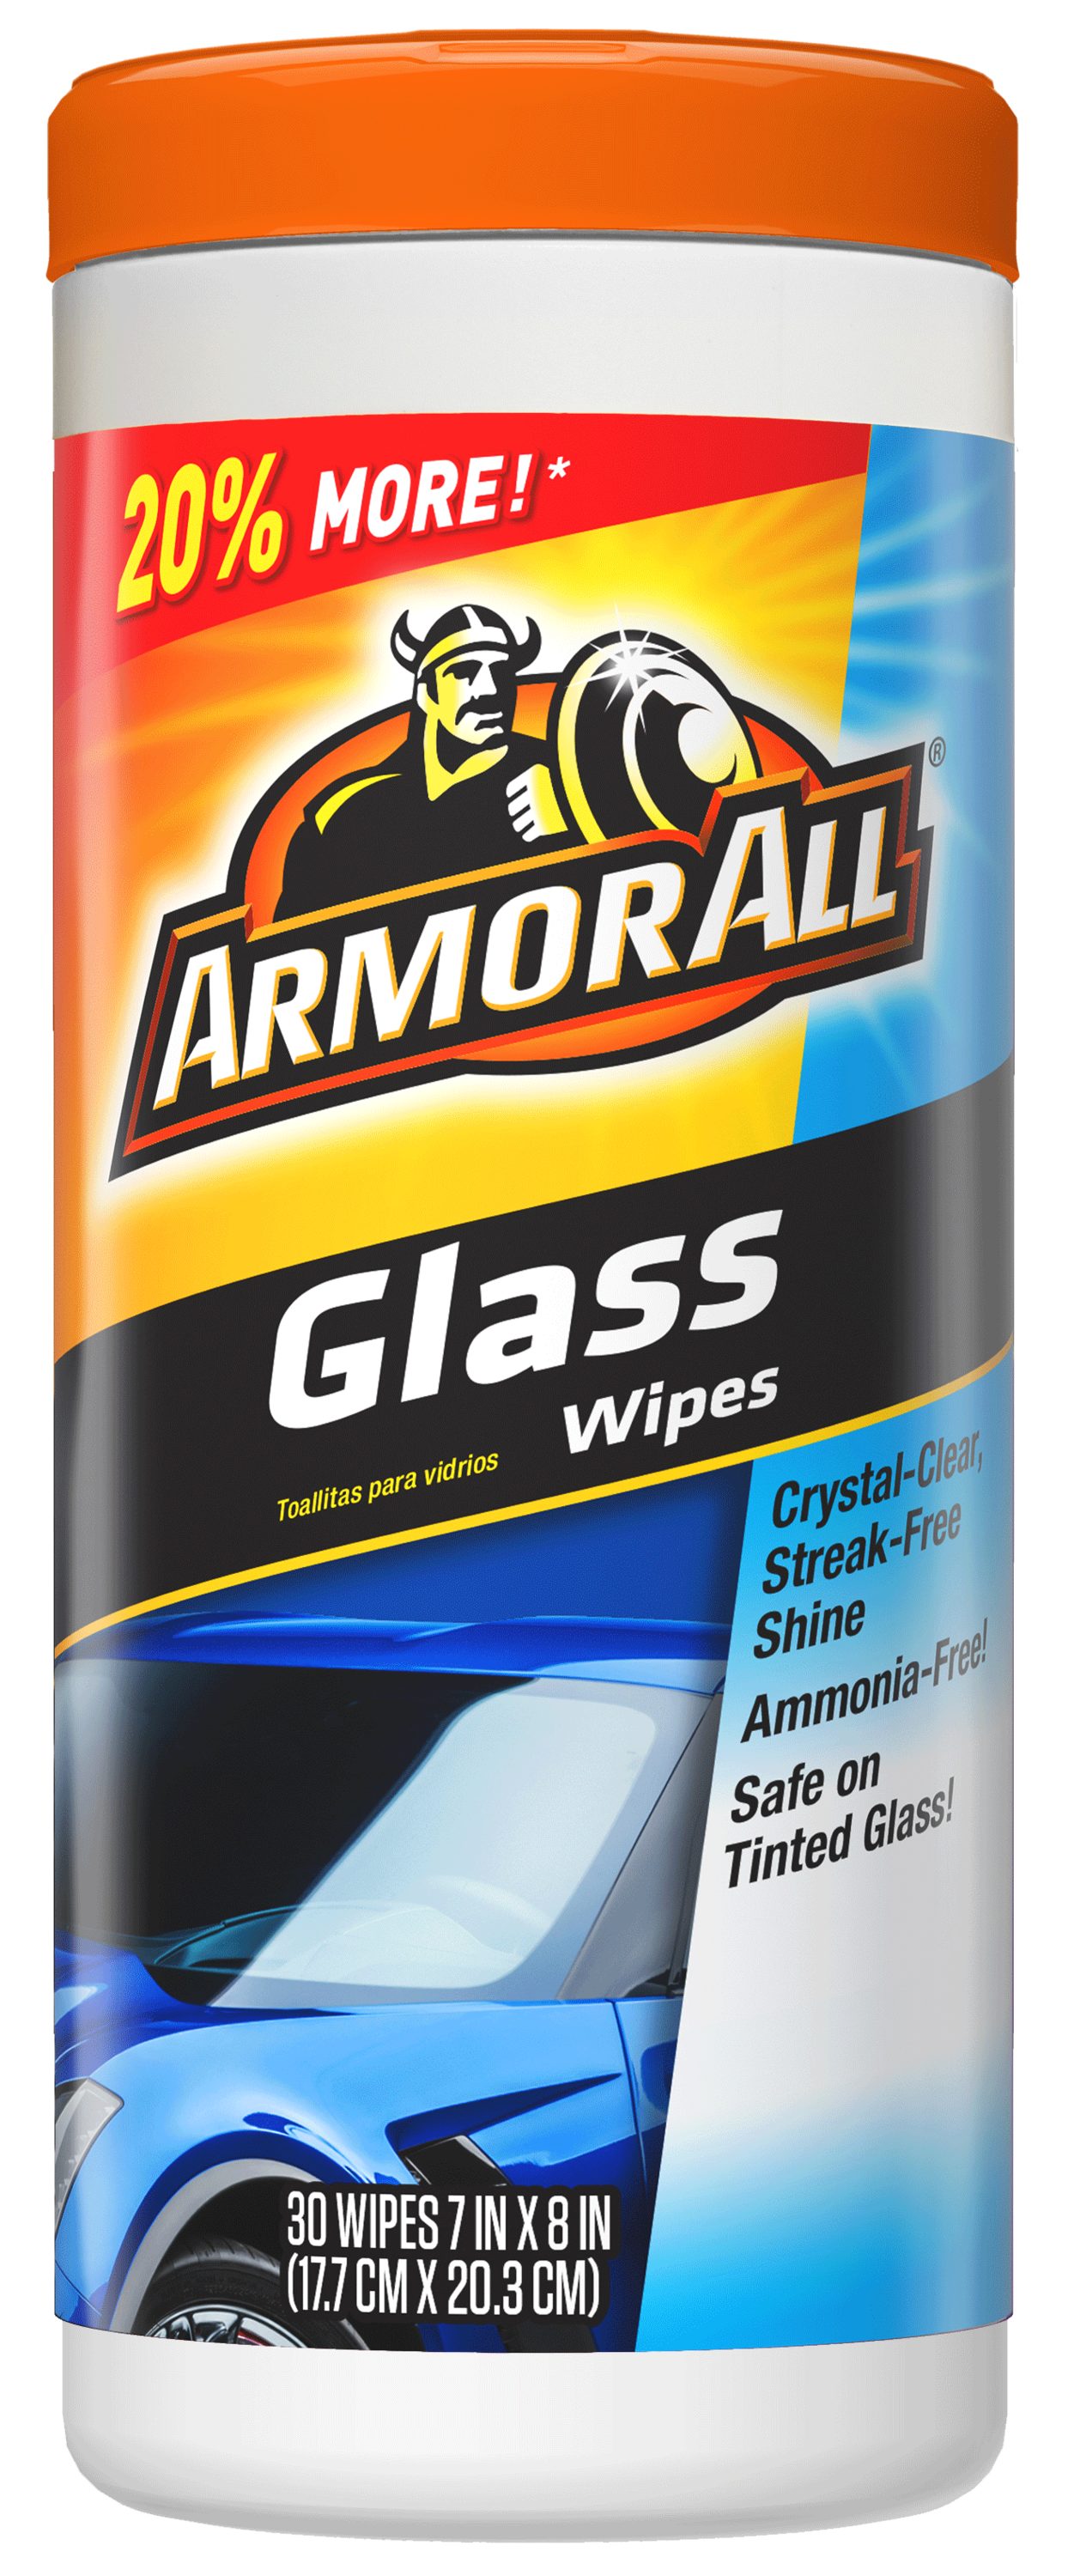 Armor All 3pk 30ct Triple Pack Protectant/cleaning/glass Wipes